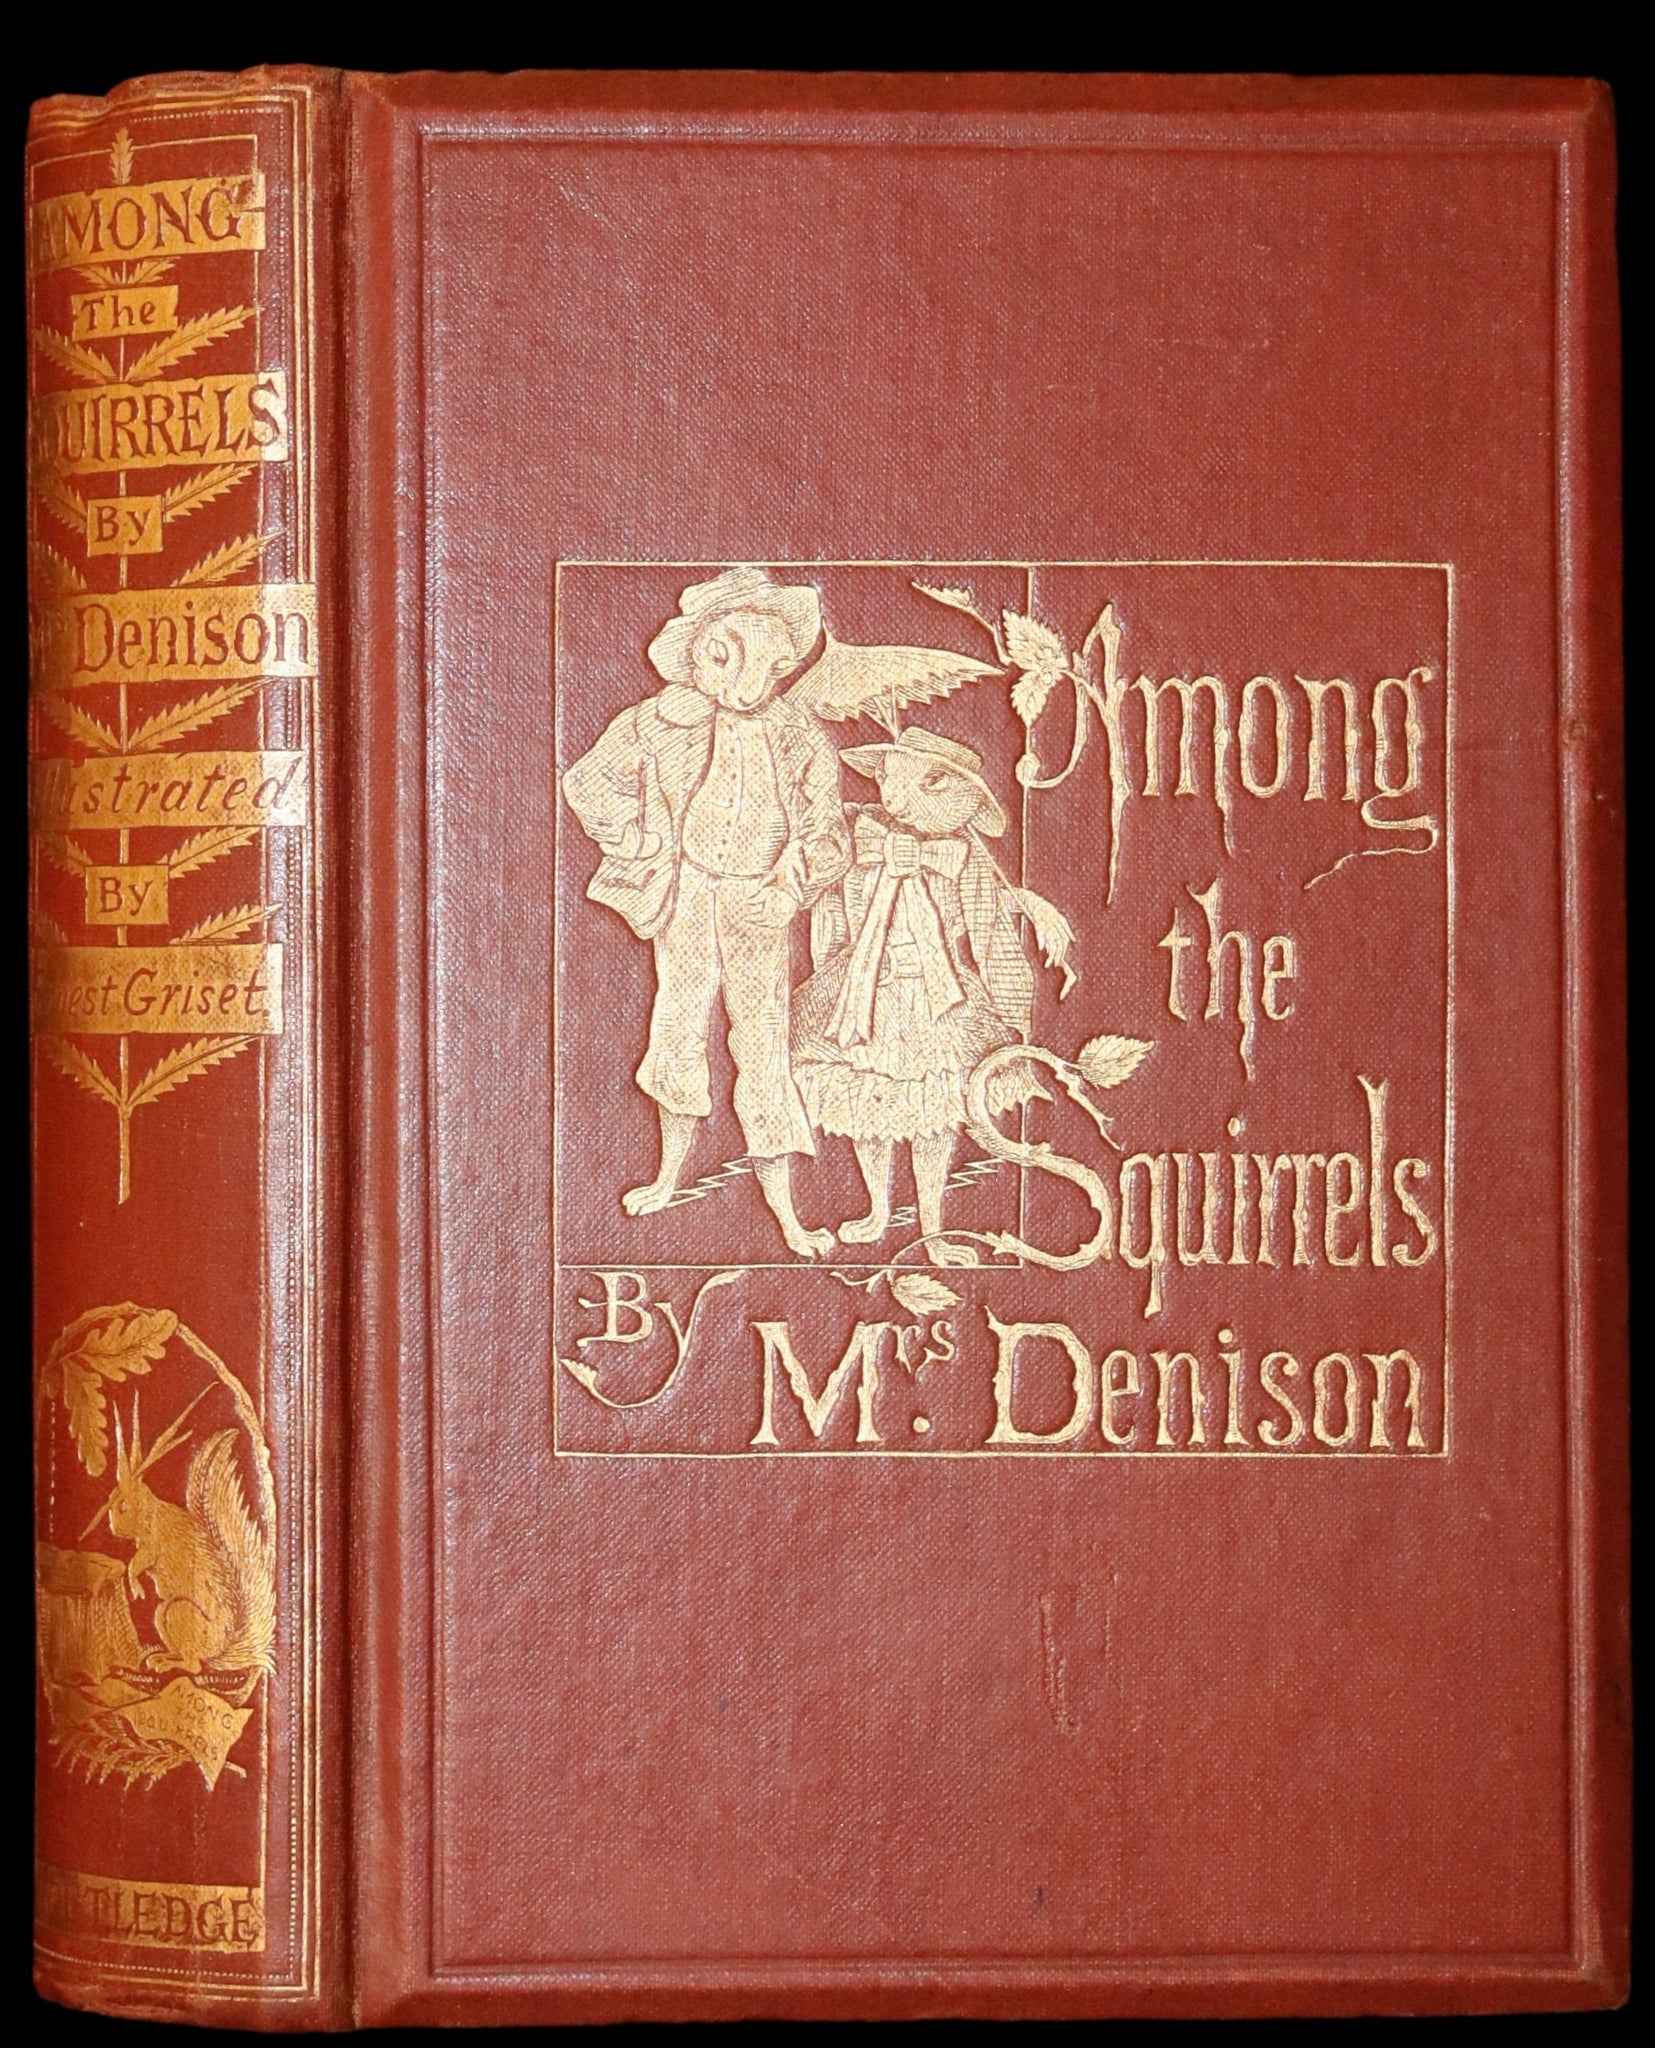 1867 Scarce First Edition ~ AMONG THE SQUIRRELS by Mrs. Denison, Illustrated by Griset & engraved by Dalziel Brothers.